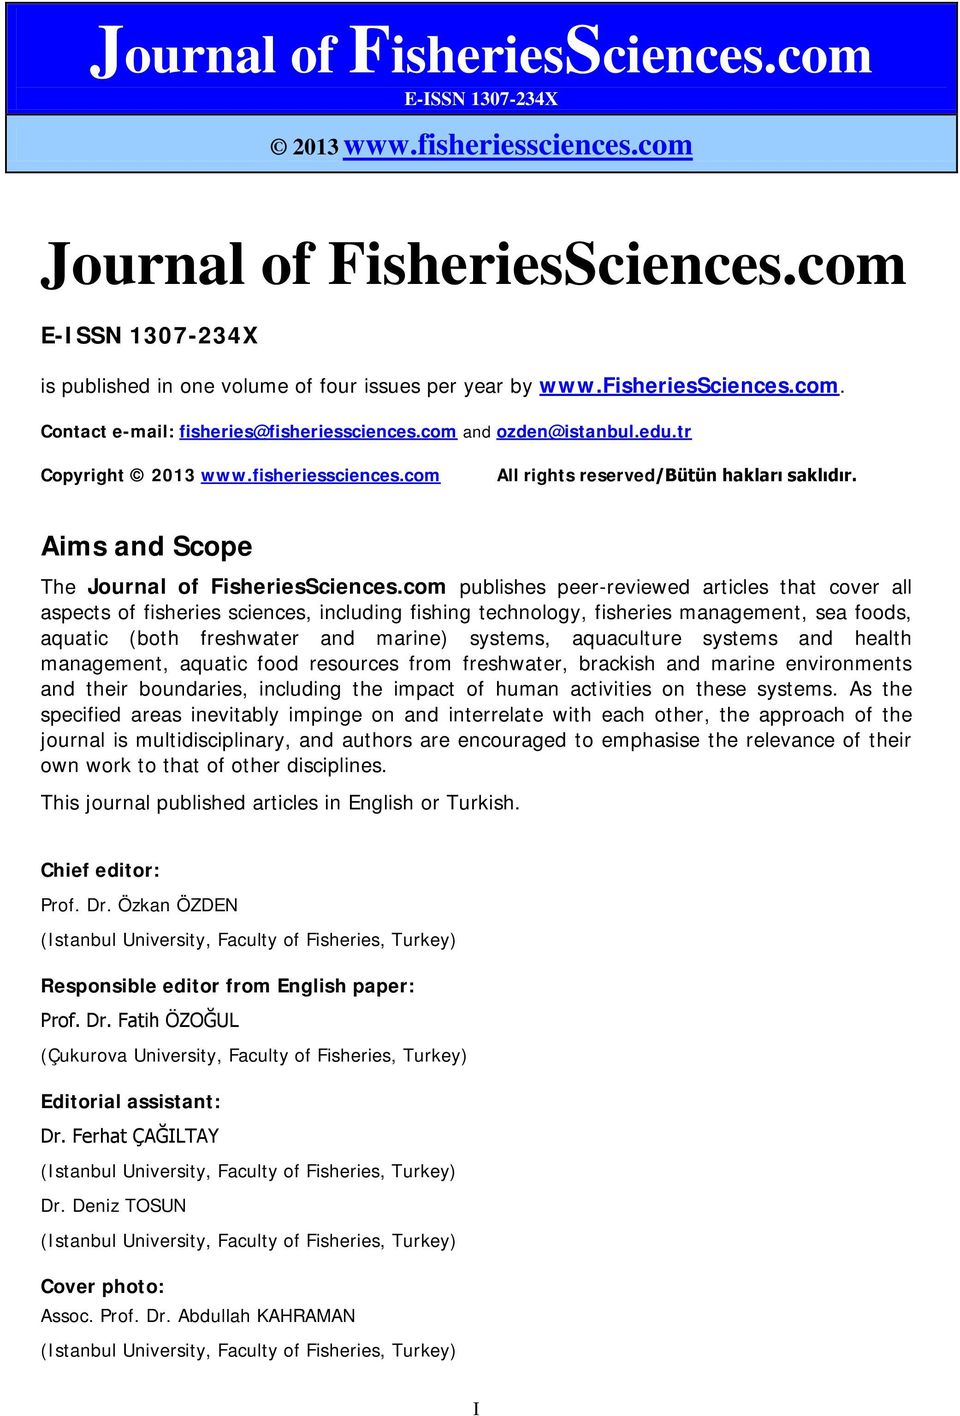 Aims and Scope The Journal of FisheriesSciences.